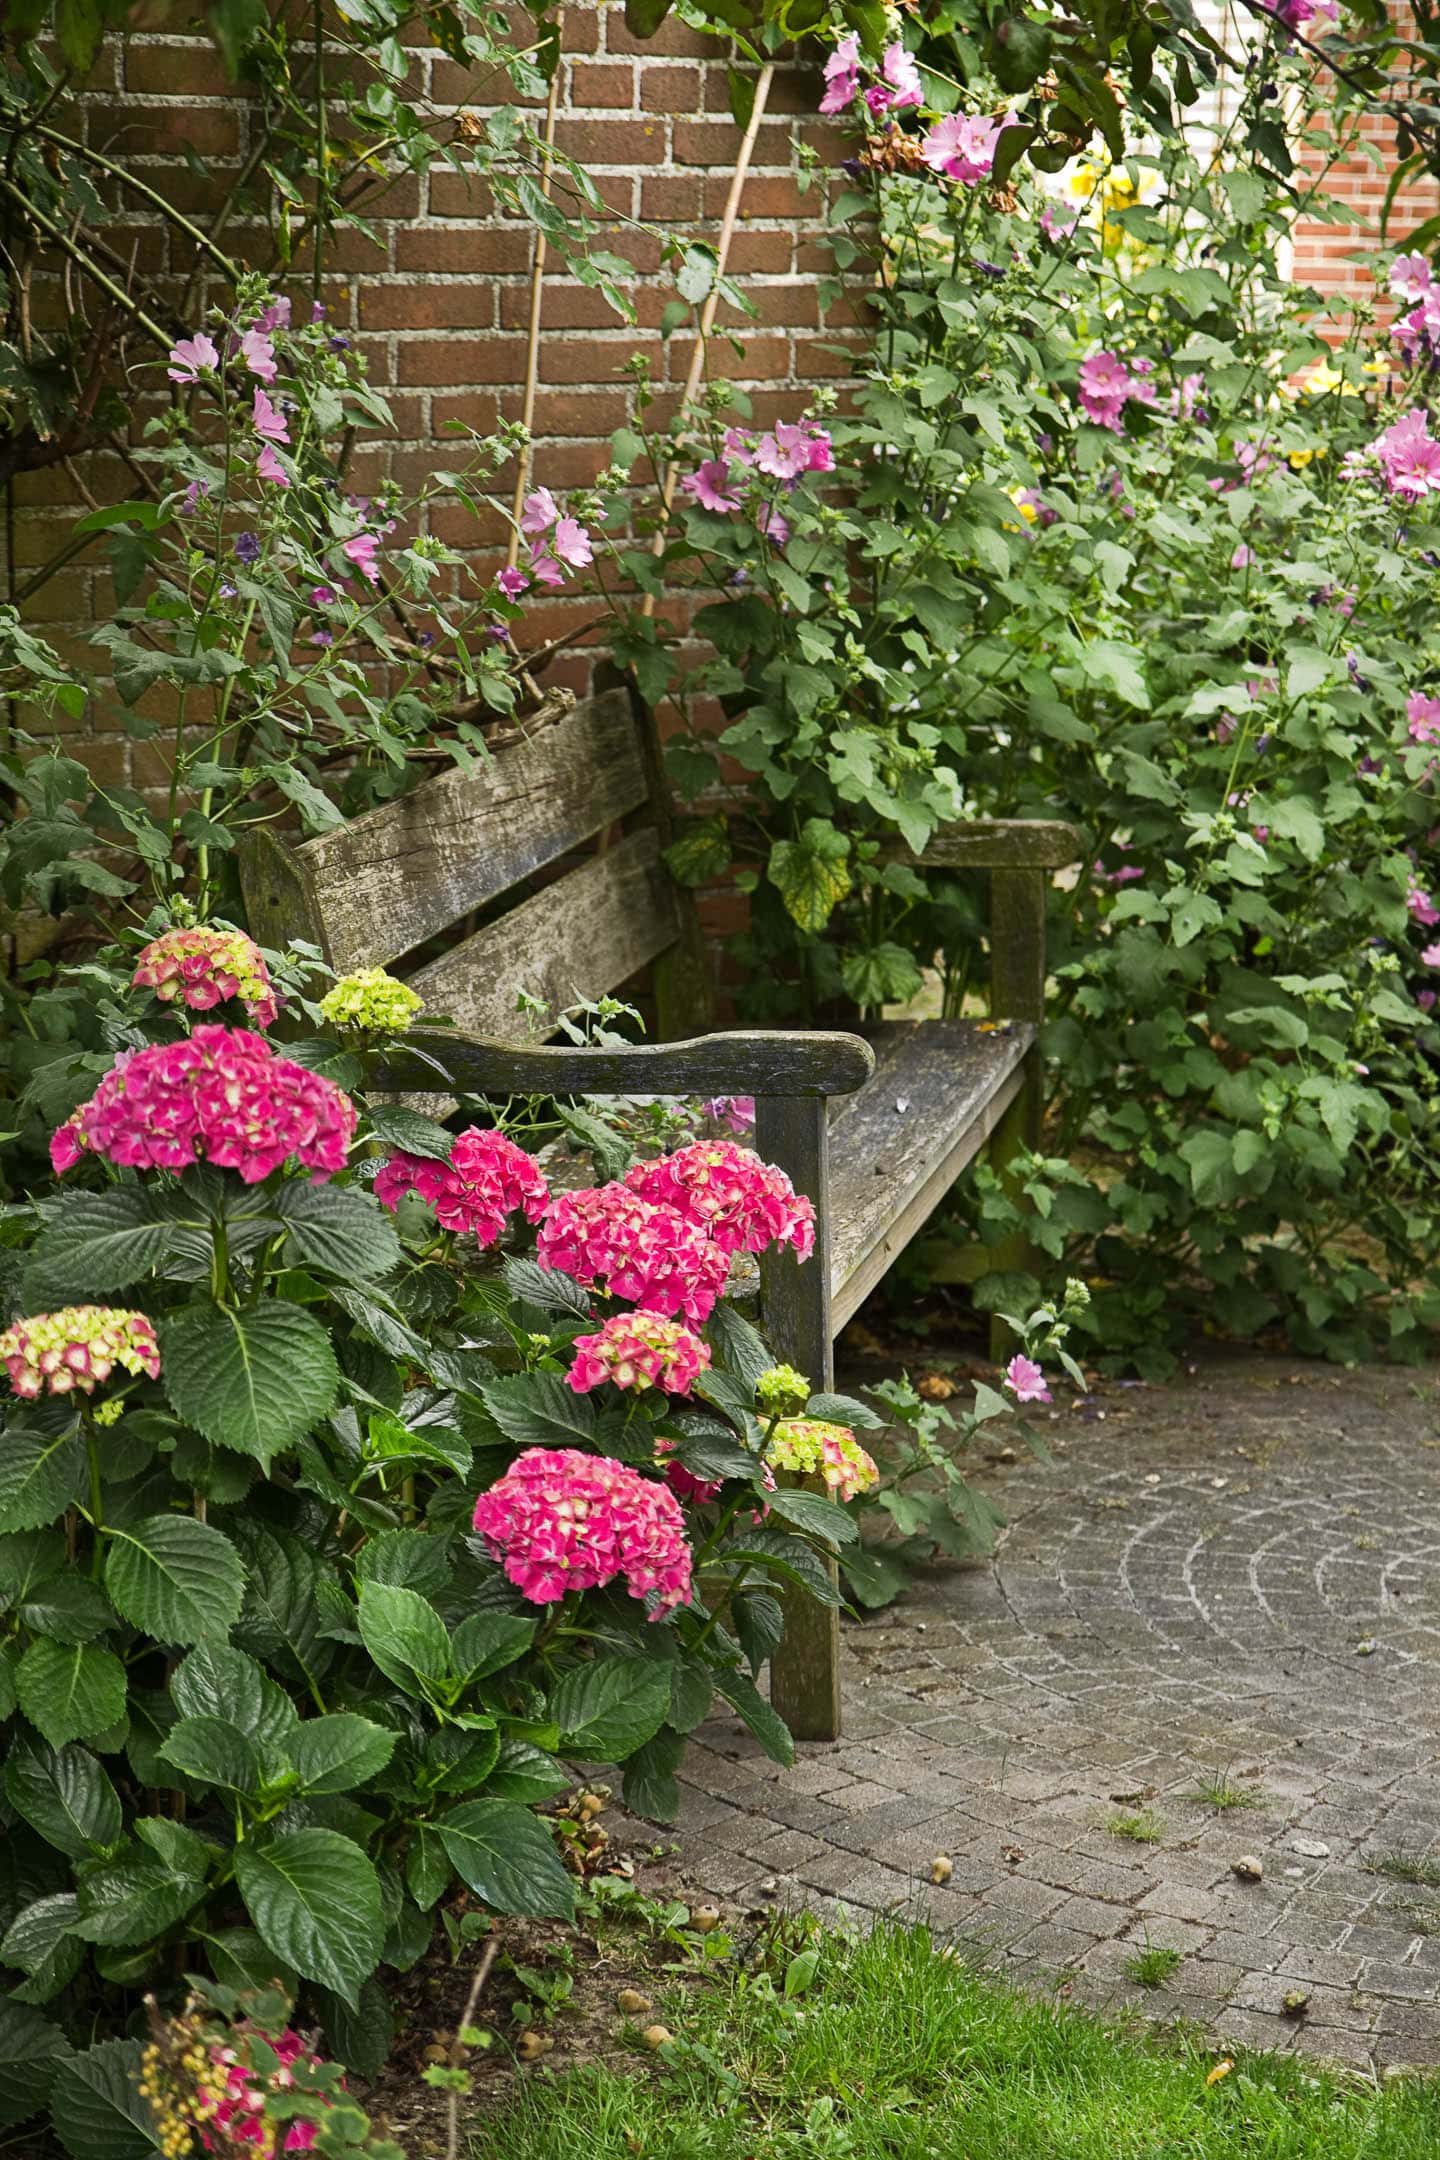 A bench on the edge of a small brick patio surrounded by roses and hydrangeas